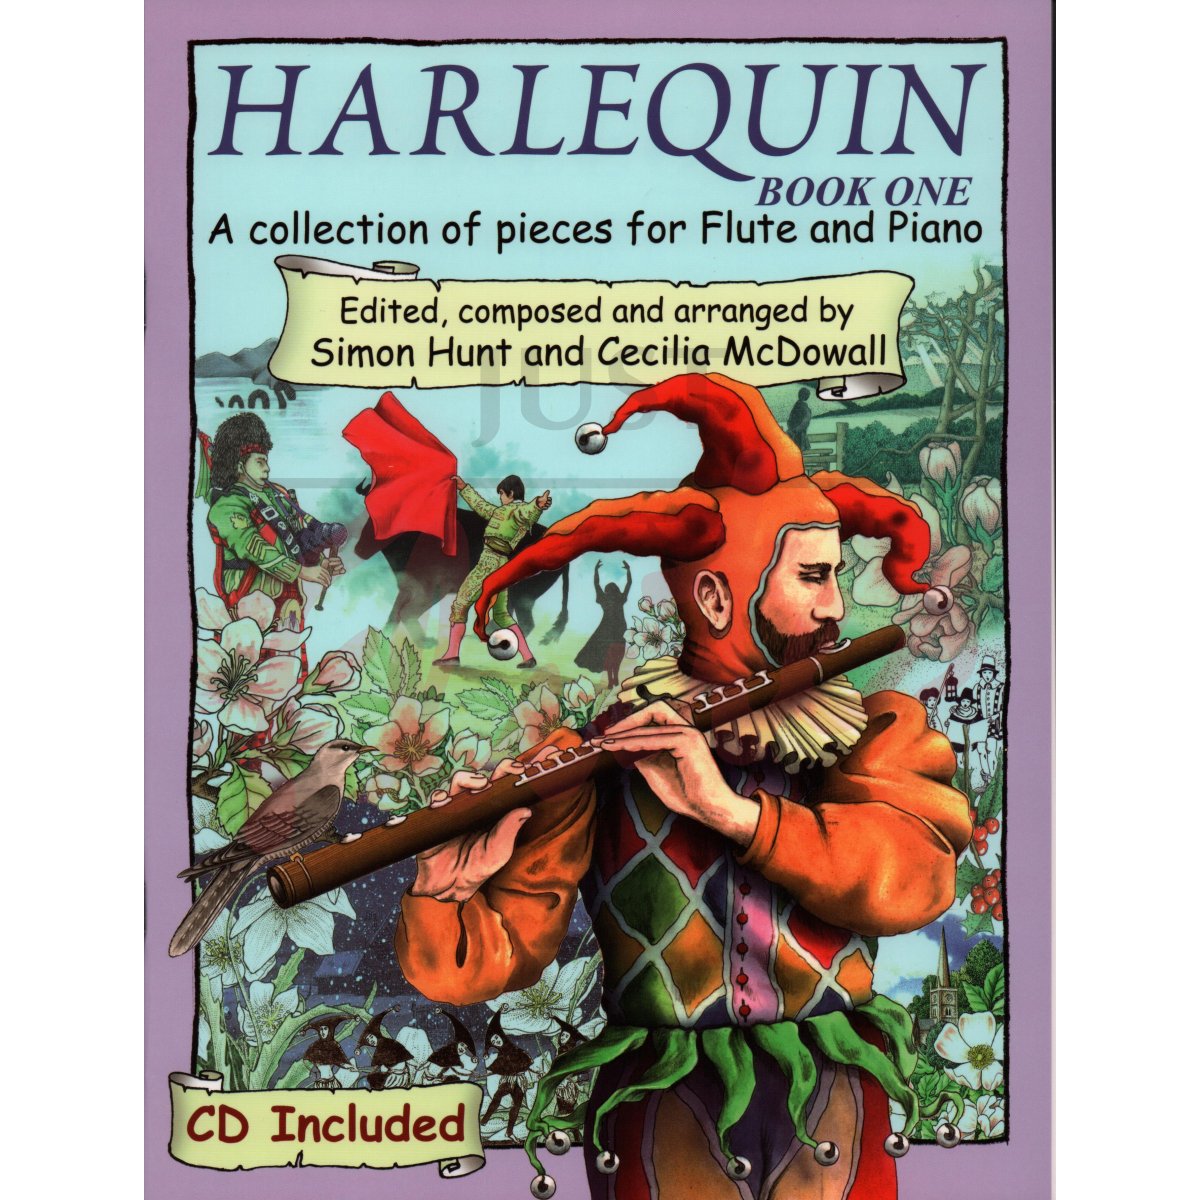 Harlequin for Flute and Piano, Book 1